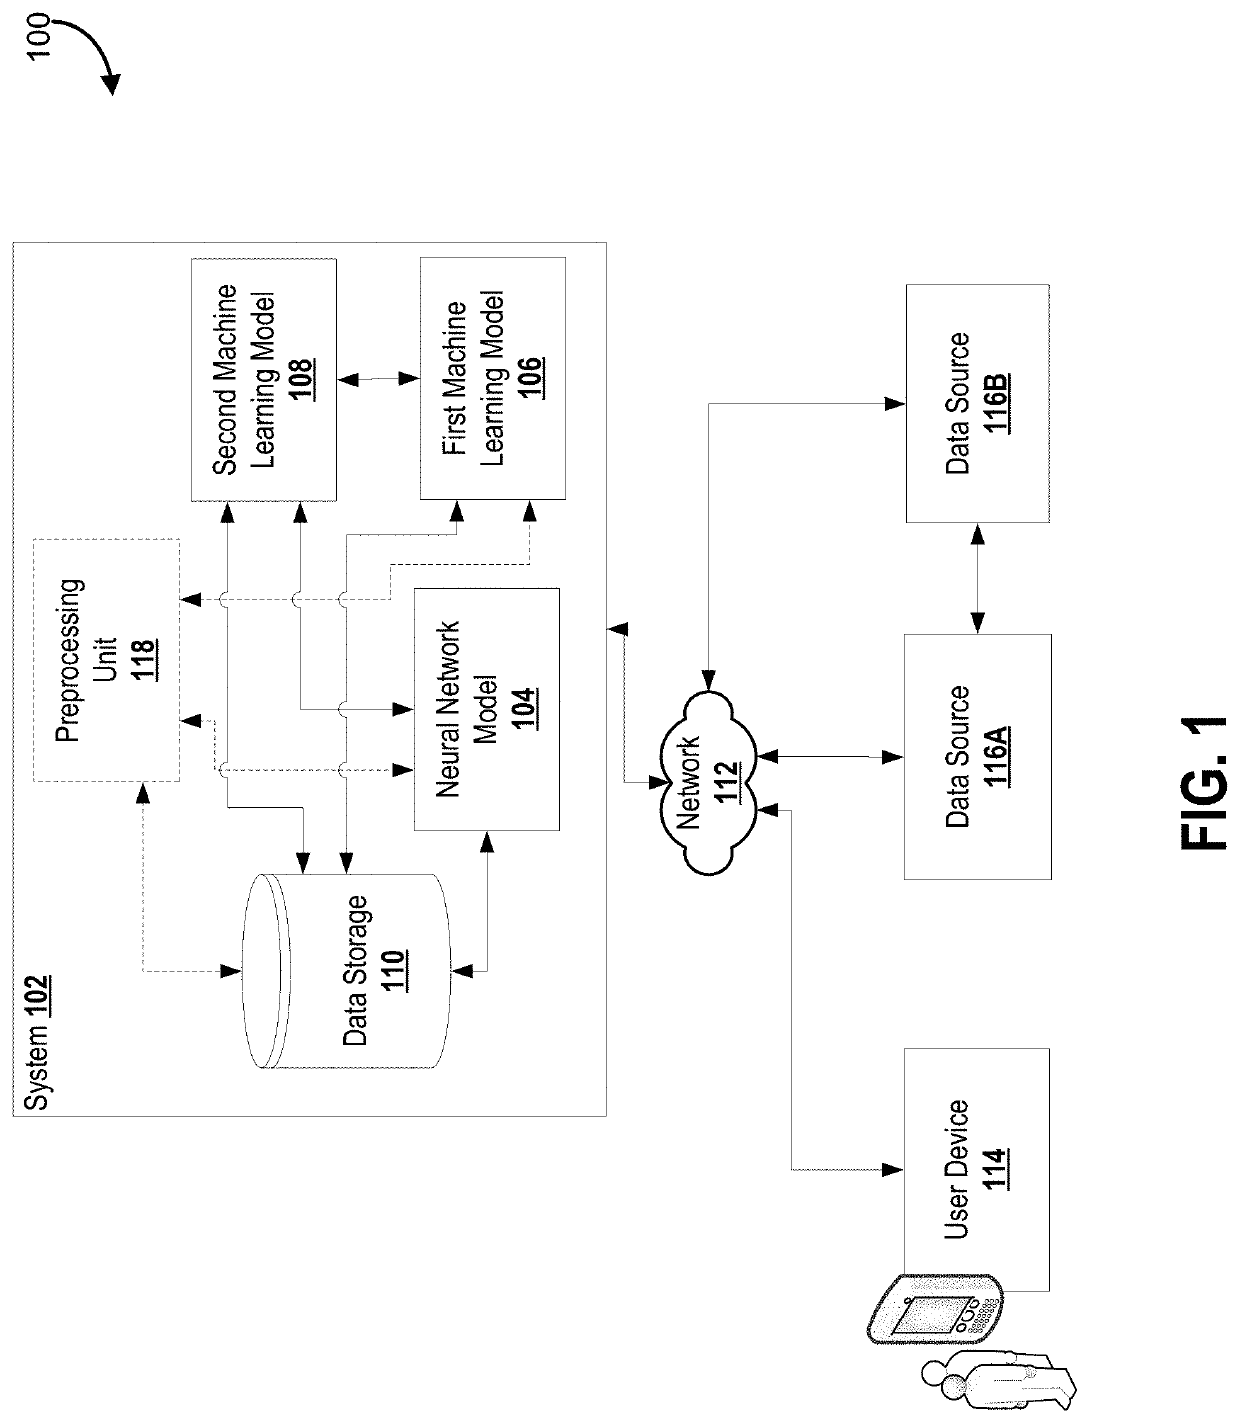 System and method for machine learning architecture for enterprise capitalization